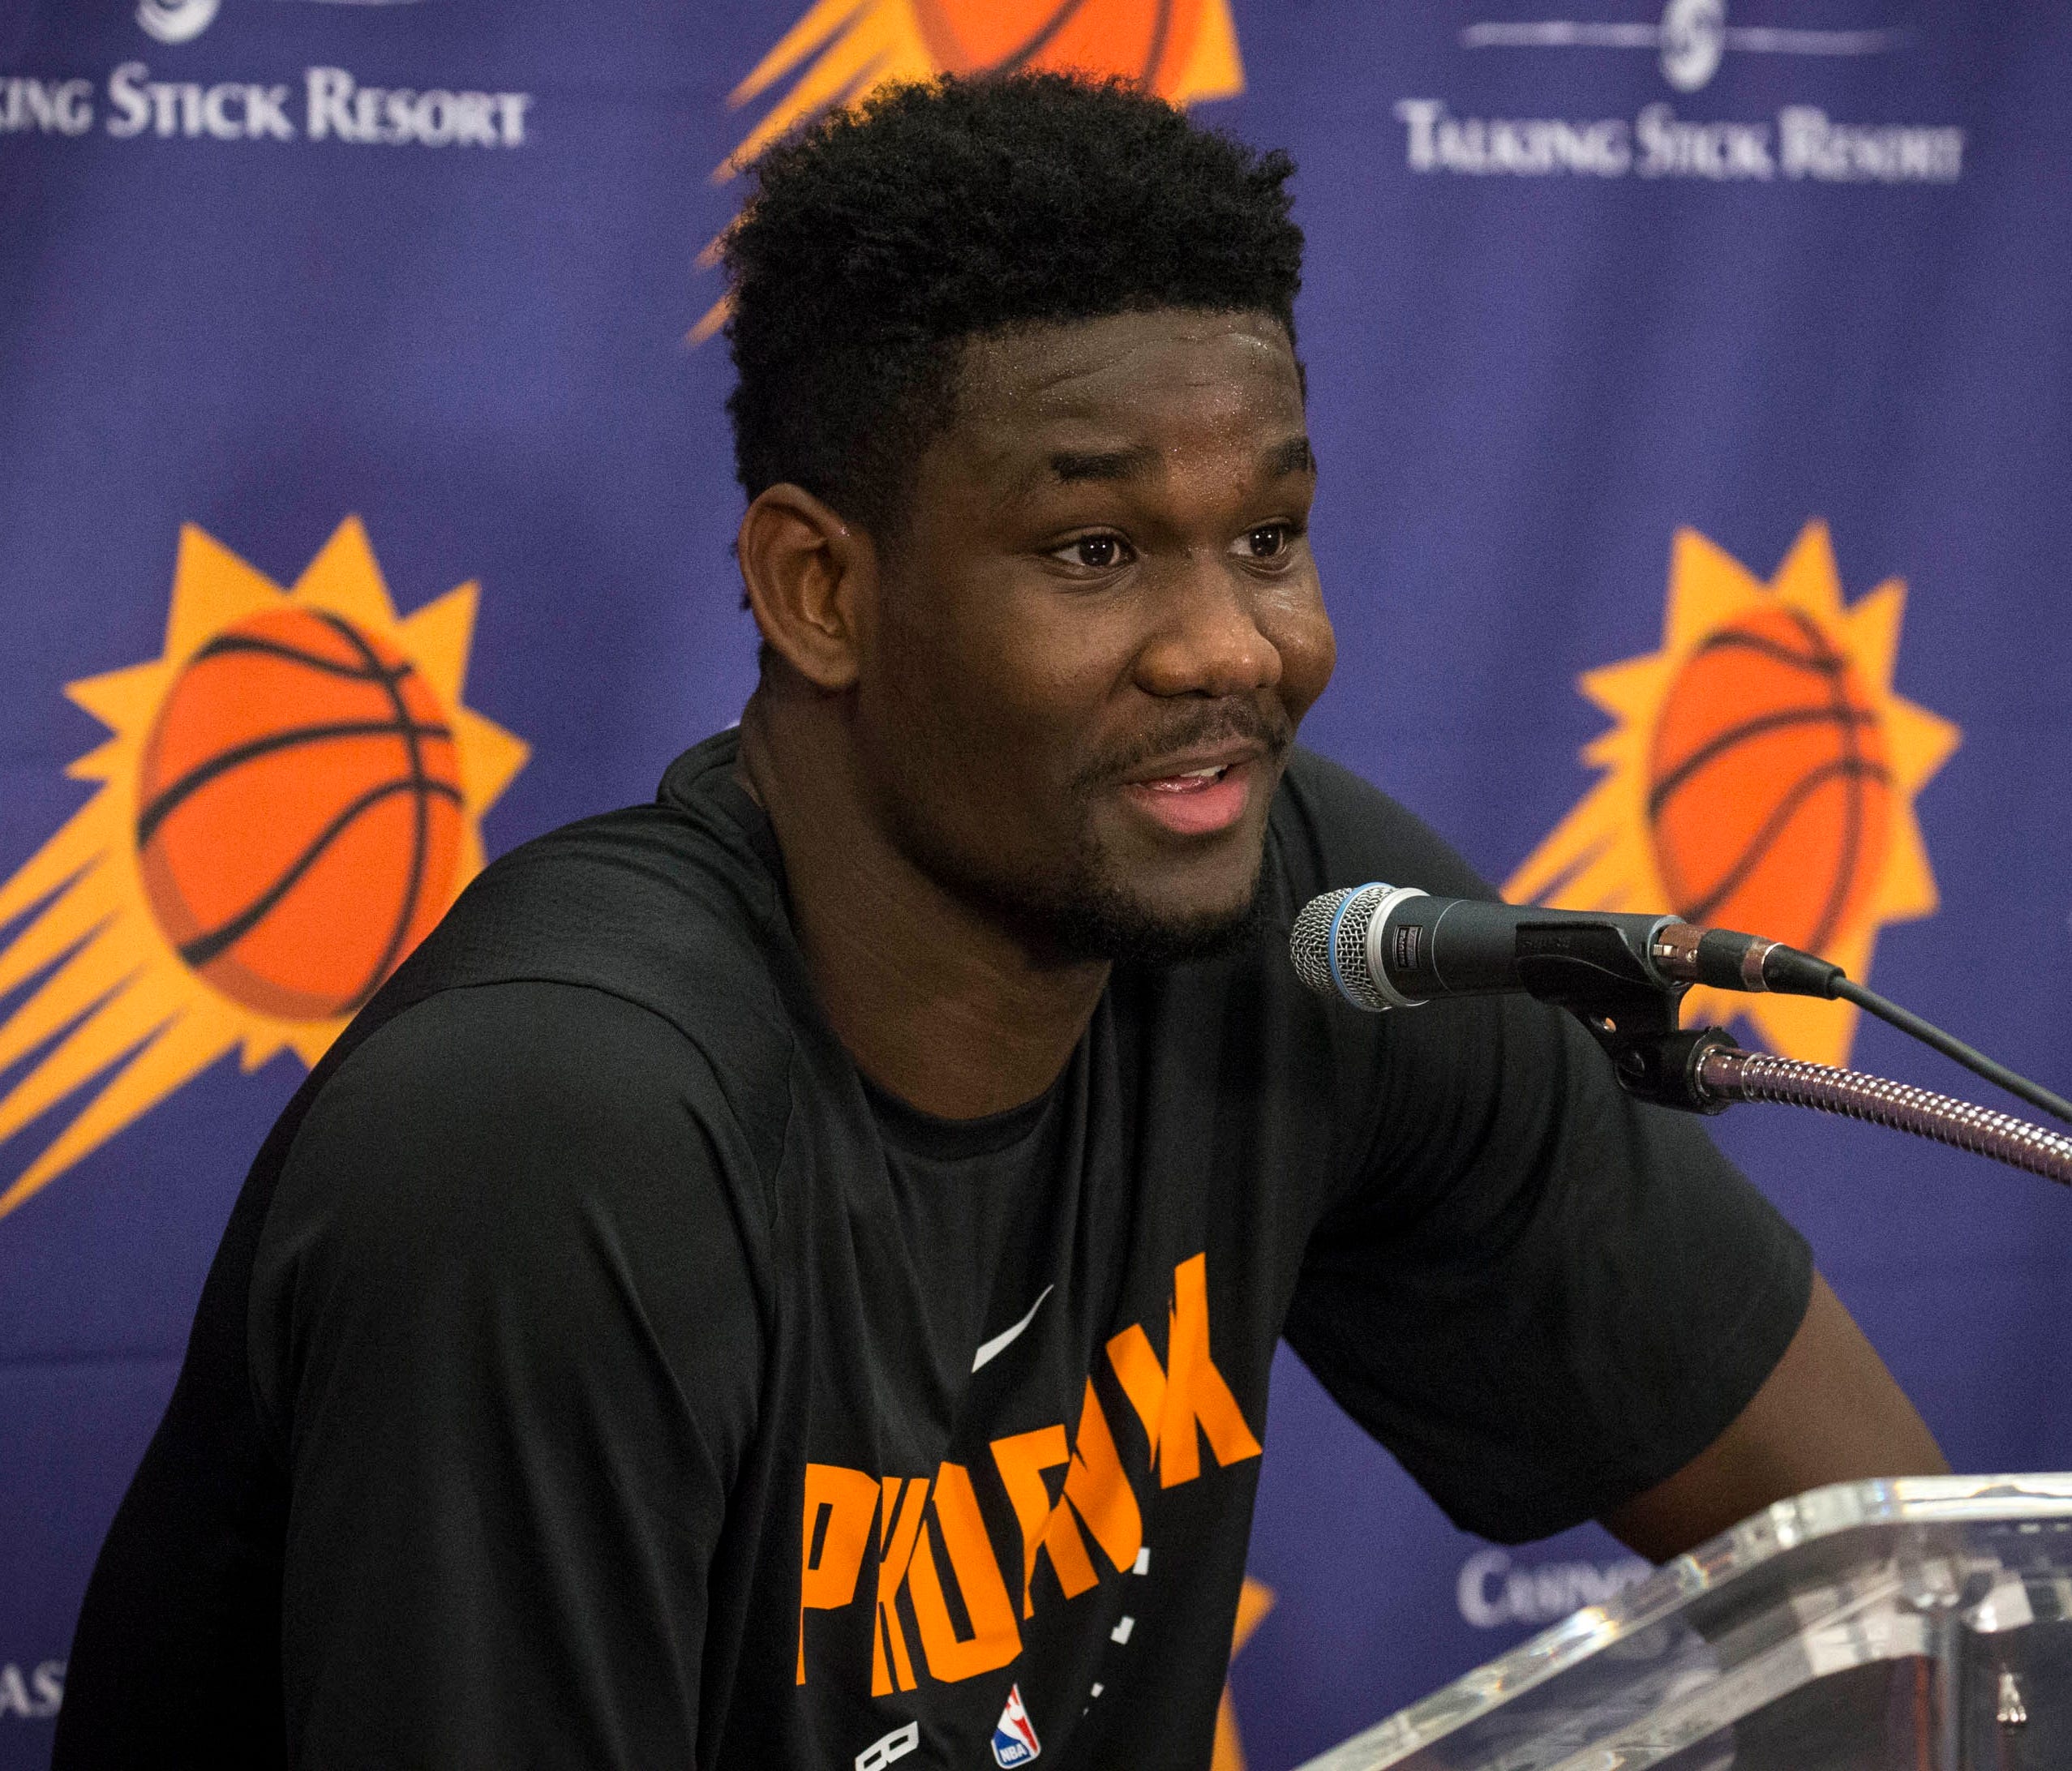 Deandre Ayton, who worked out for the Suns last week, is the presumptive No. 1 pick.